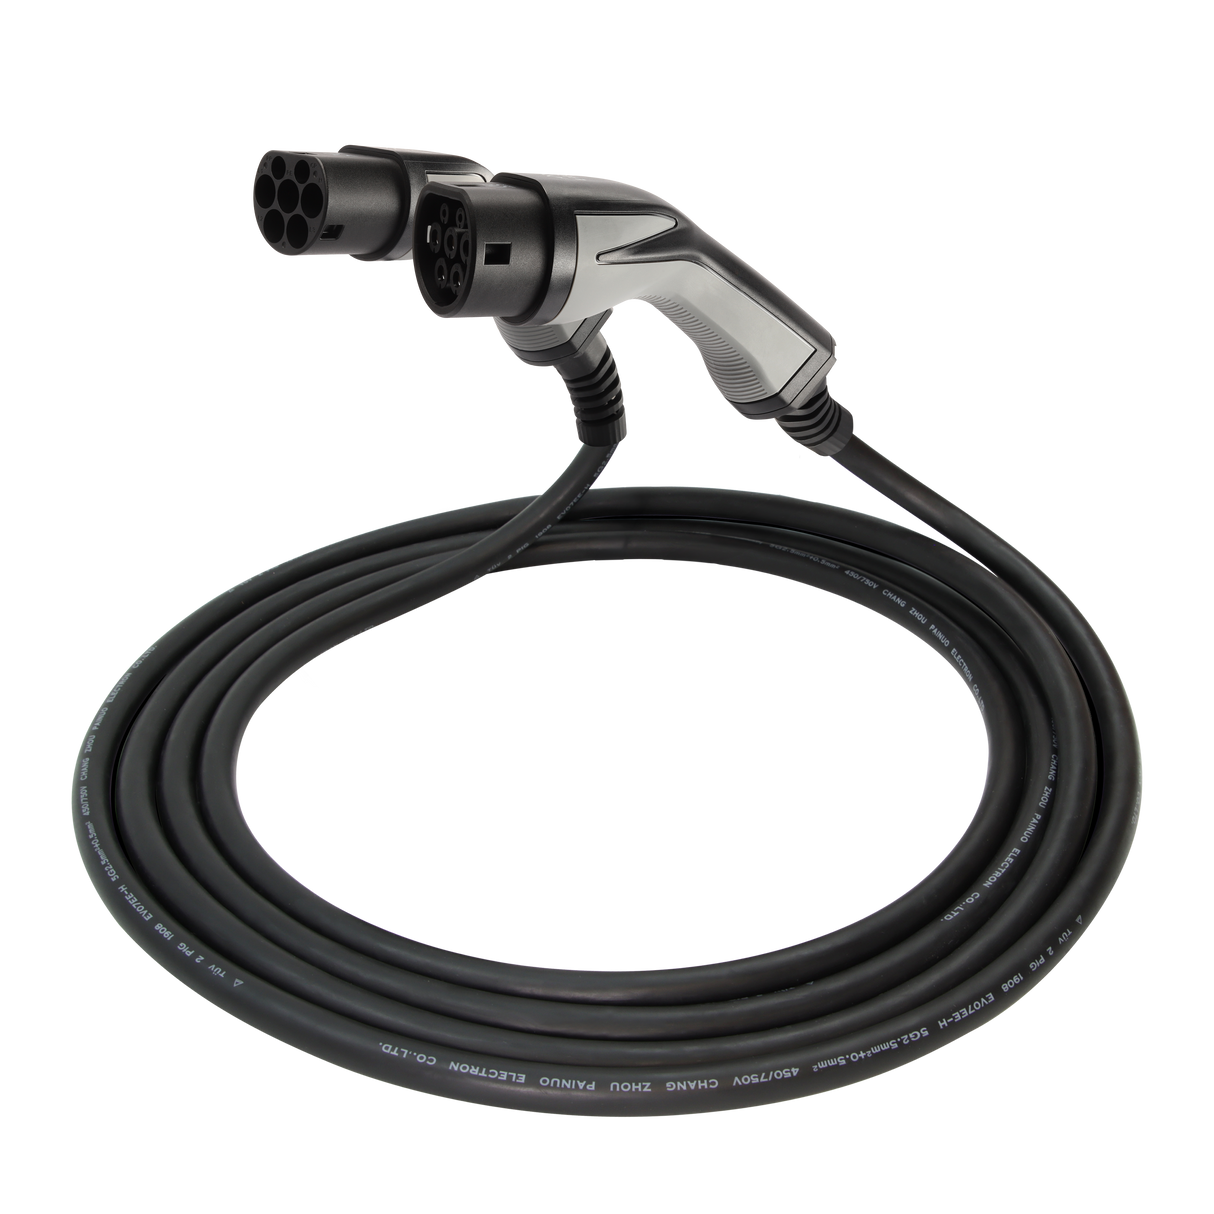 Charging cable Lexus NX - Erock Pro Type 2 - 32A 1 phase (7.4 kW)